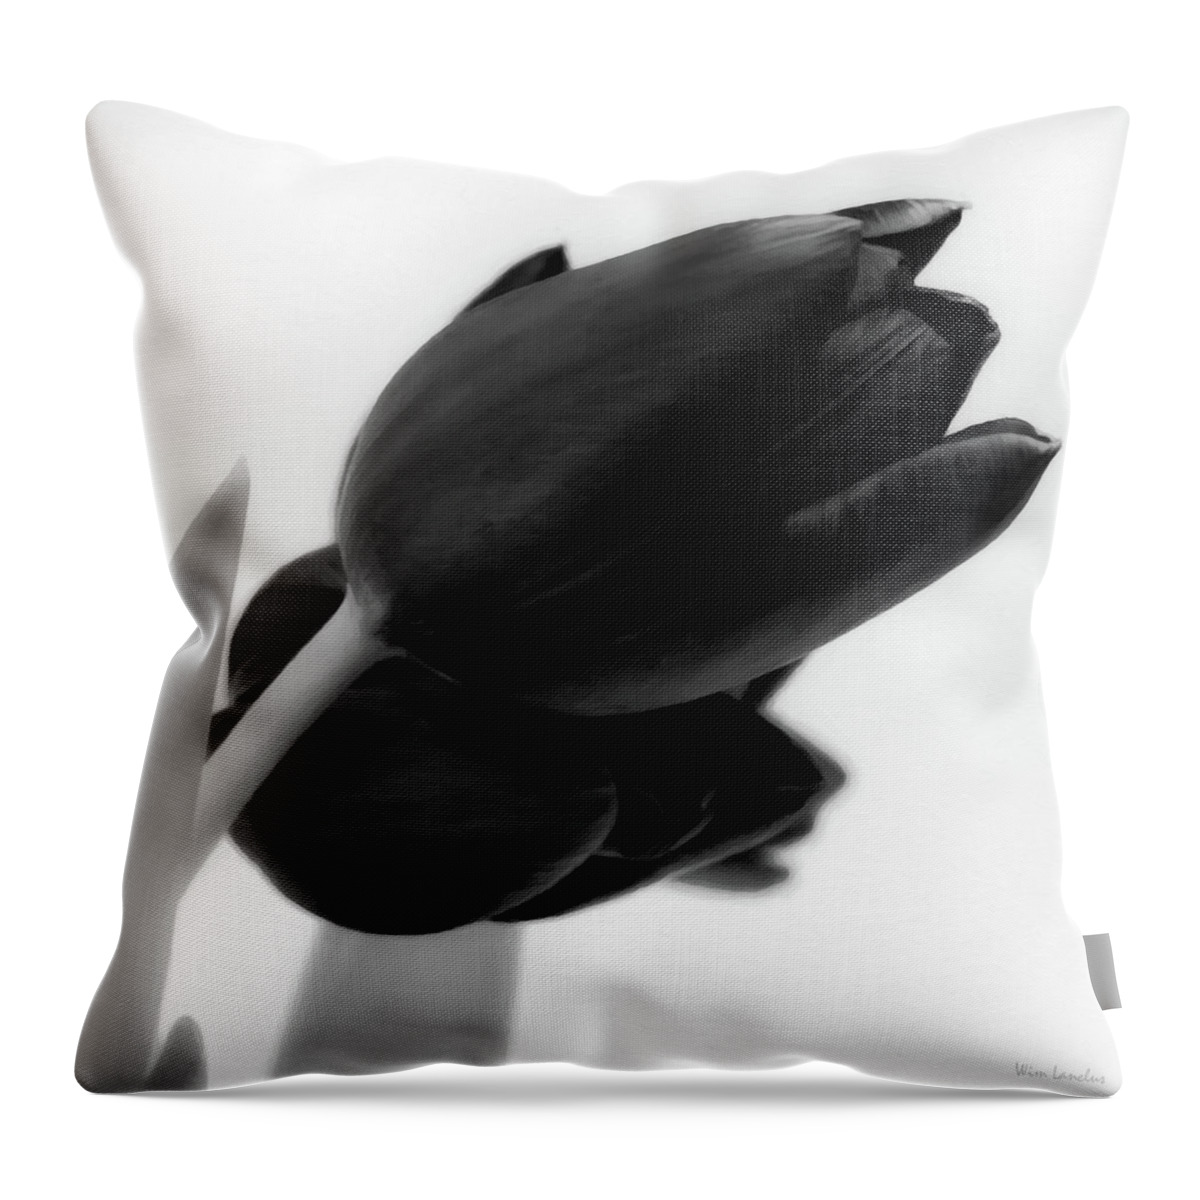 Tulips Throw Pillow featuring the photograph Black Tulips by Wim Lanclus